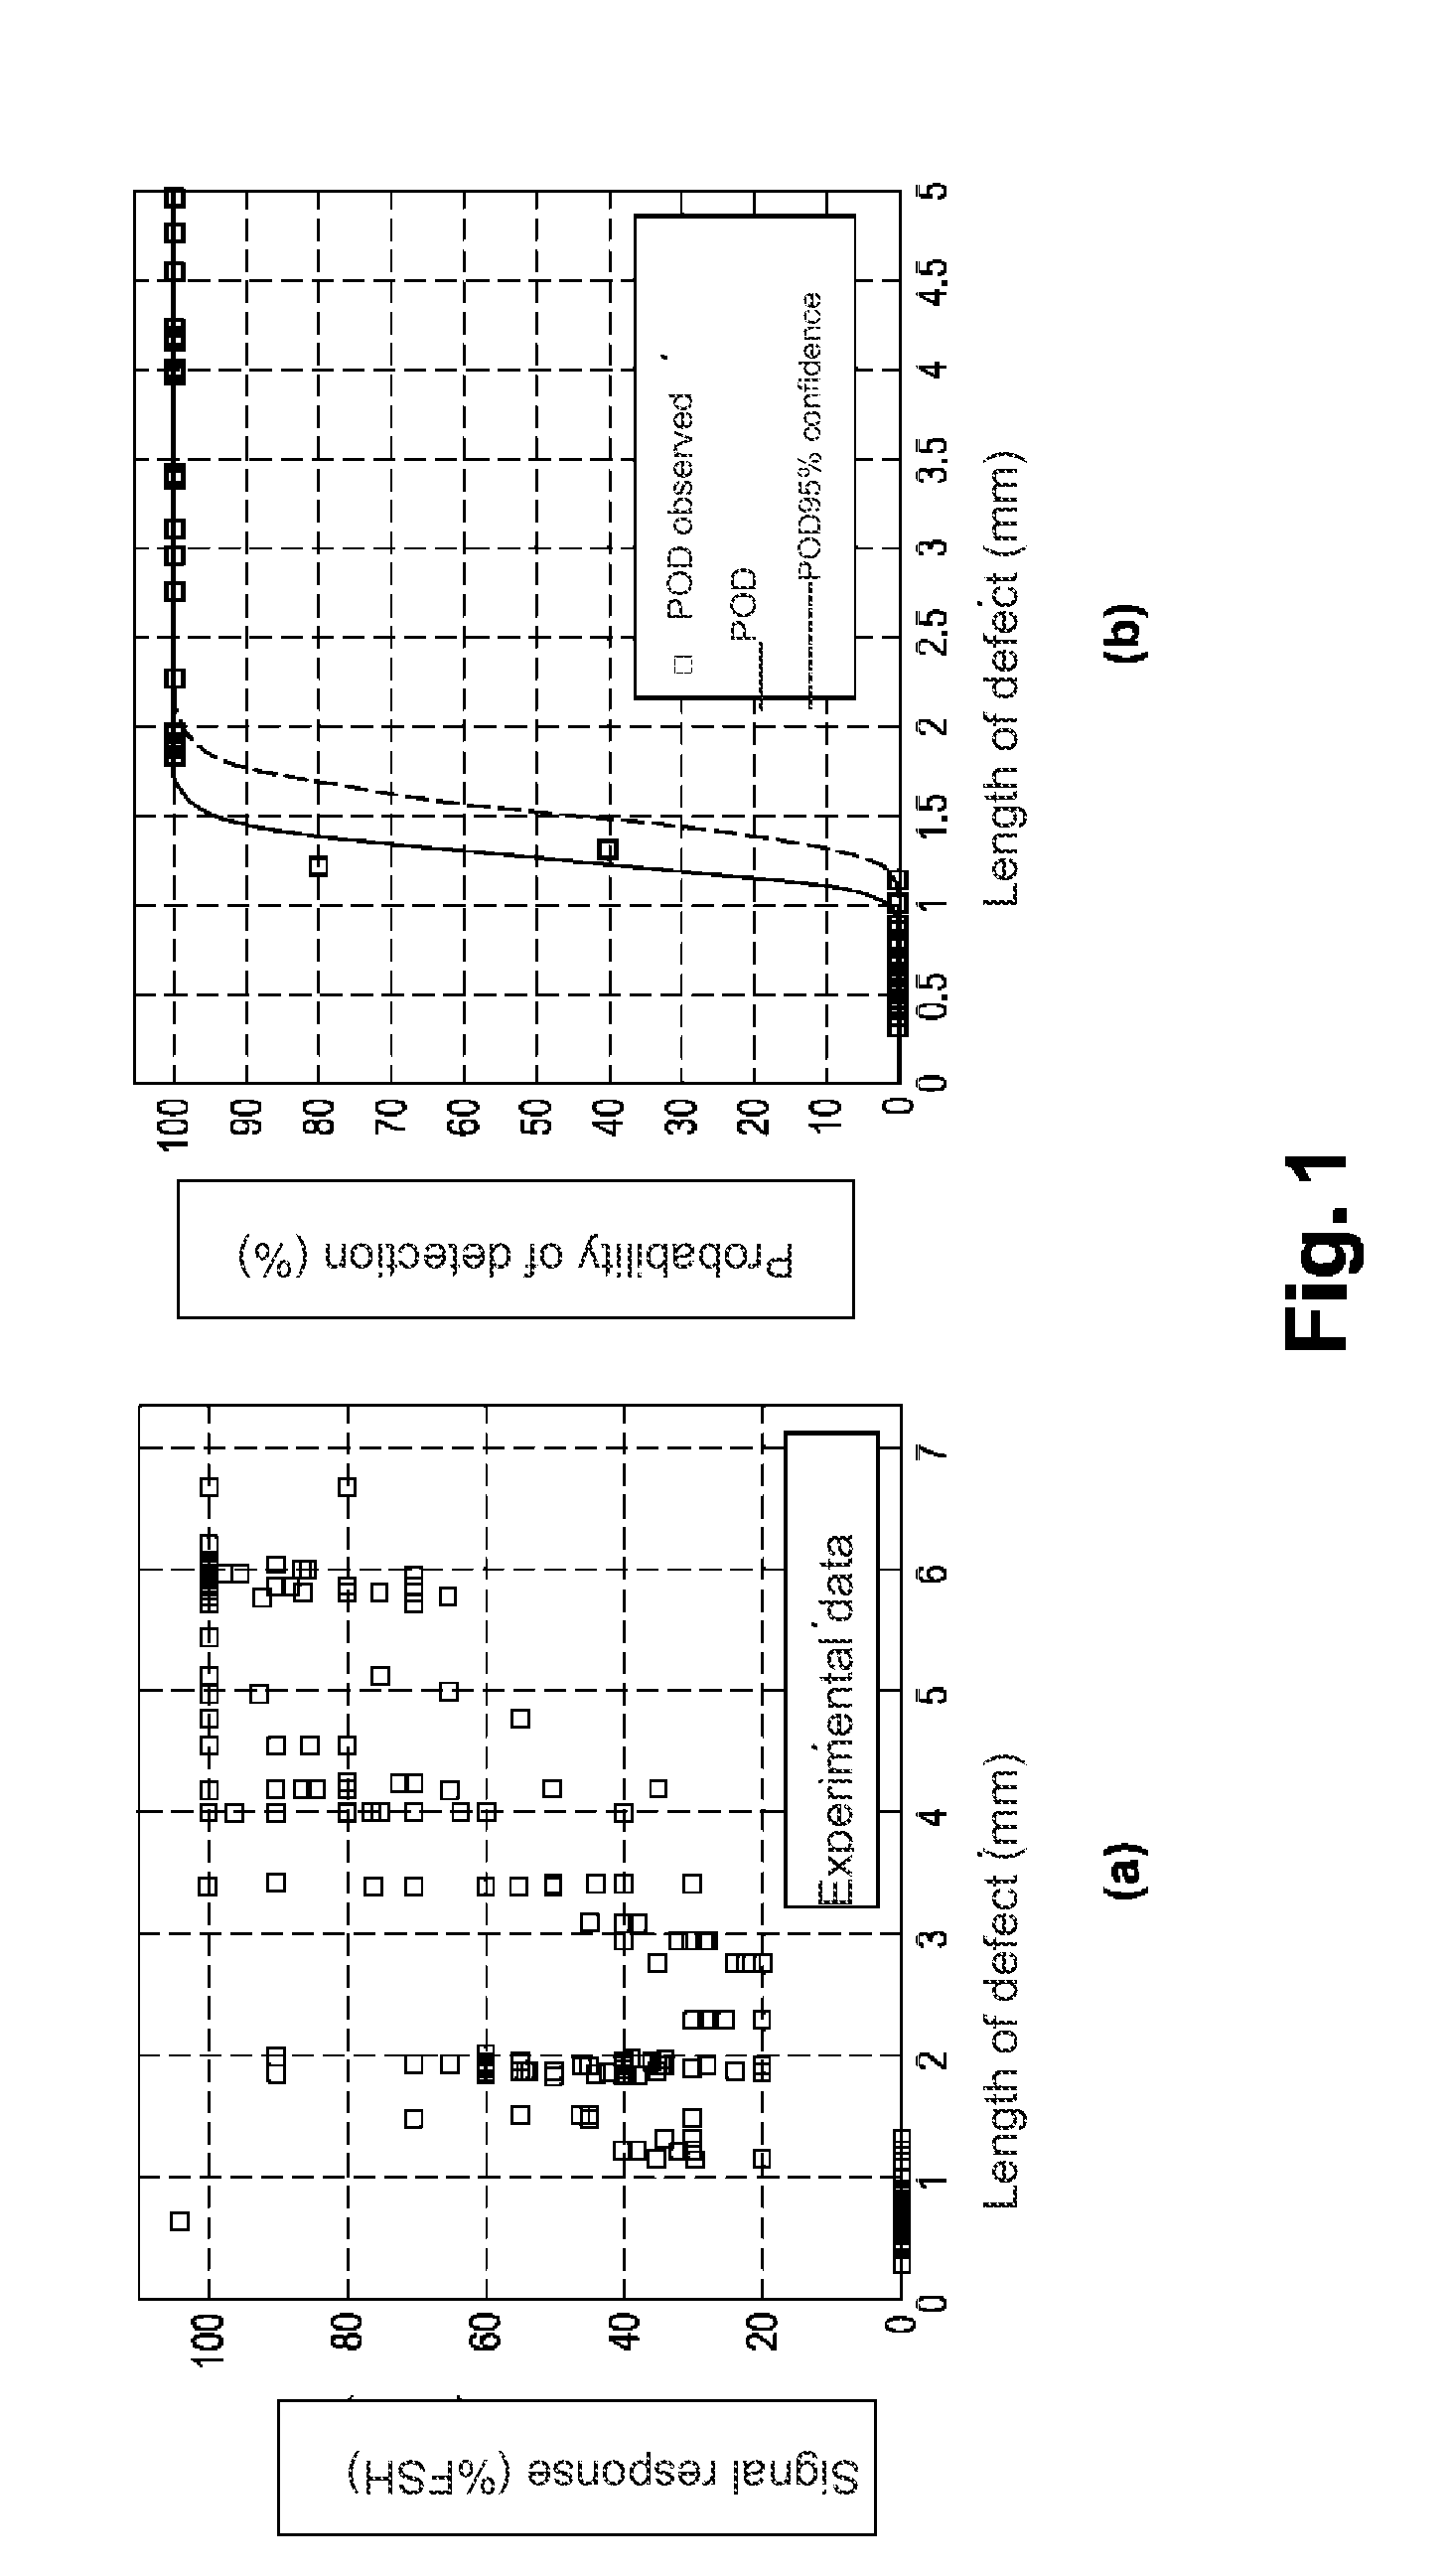 Method of simulating operations of non-destructive testing under real conditions using synthetic signals